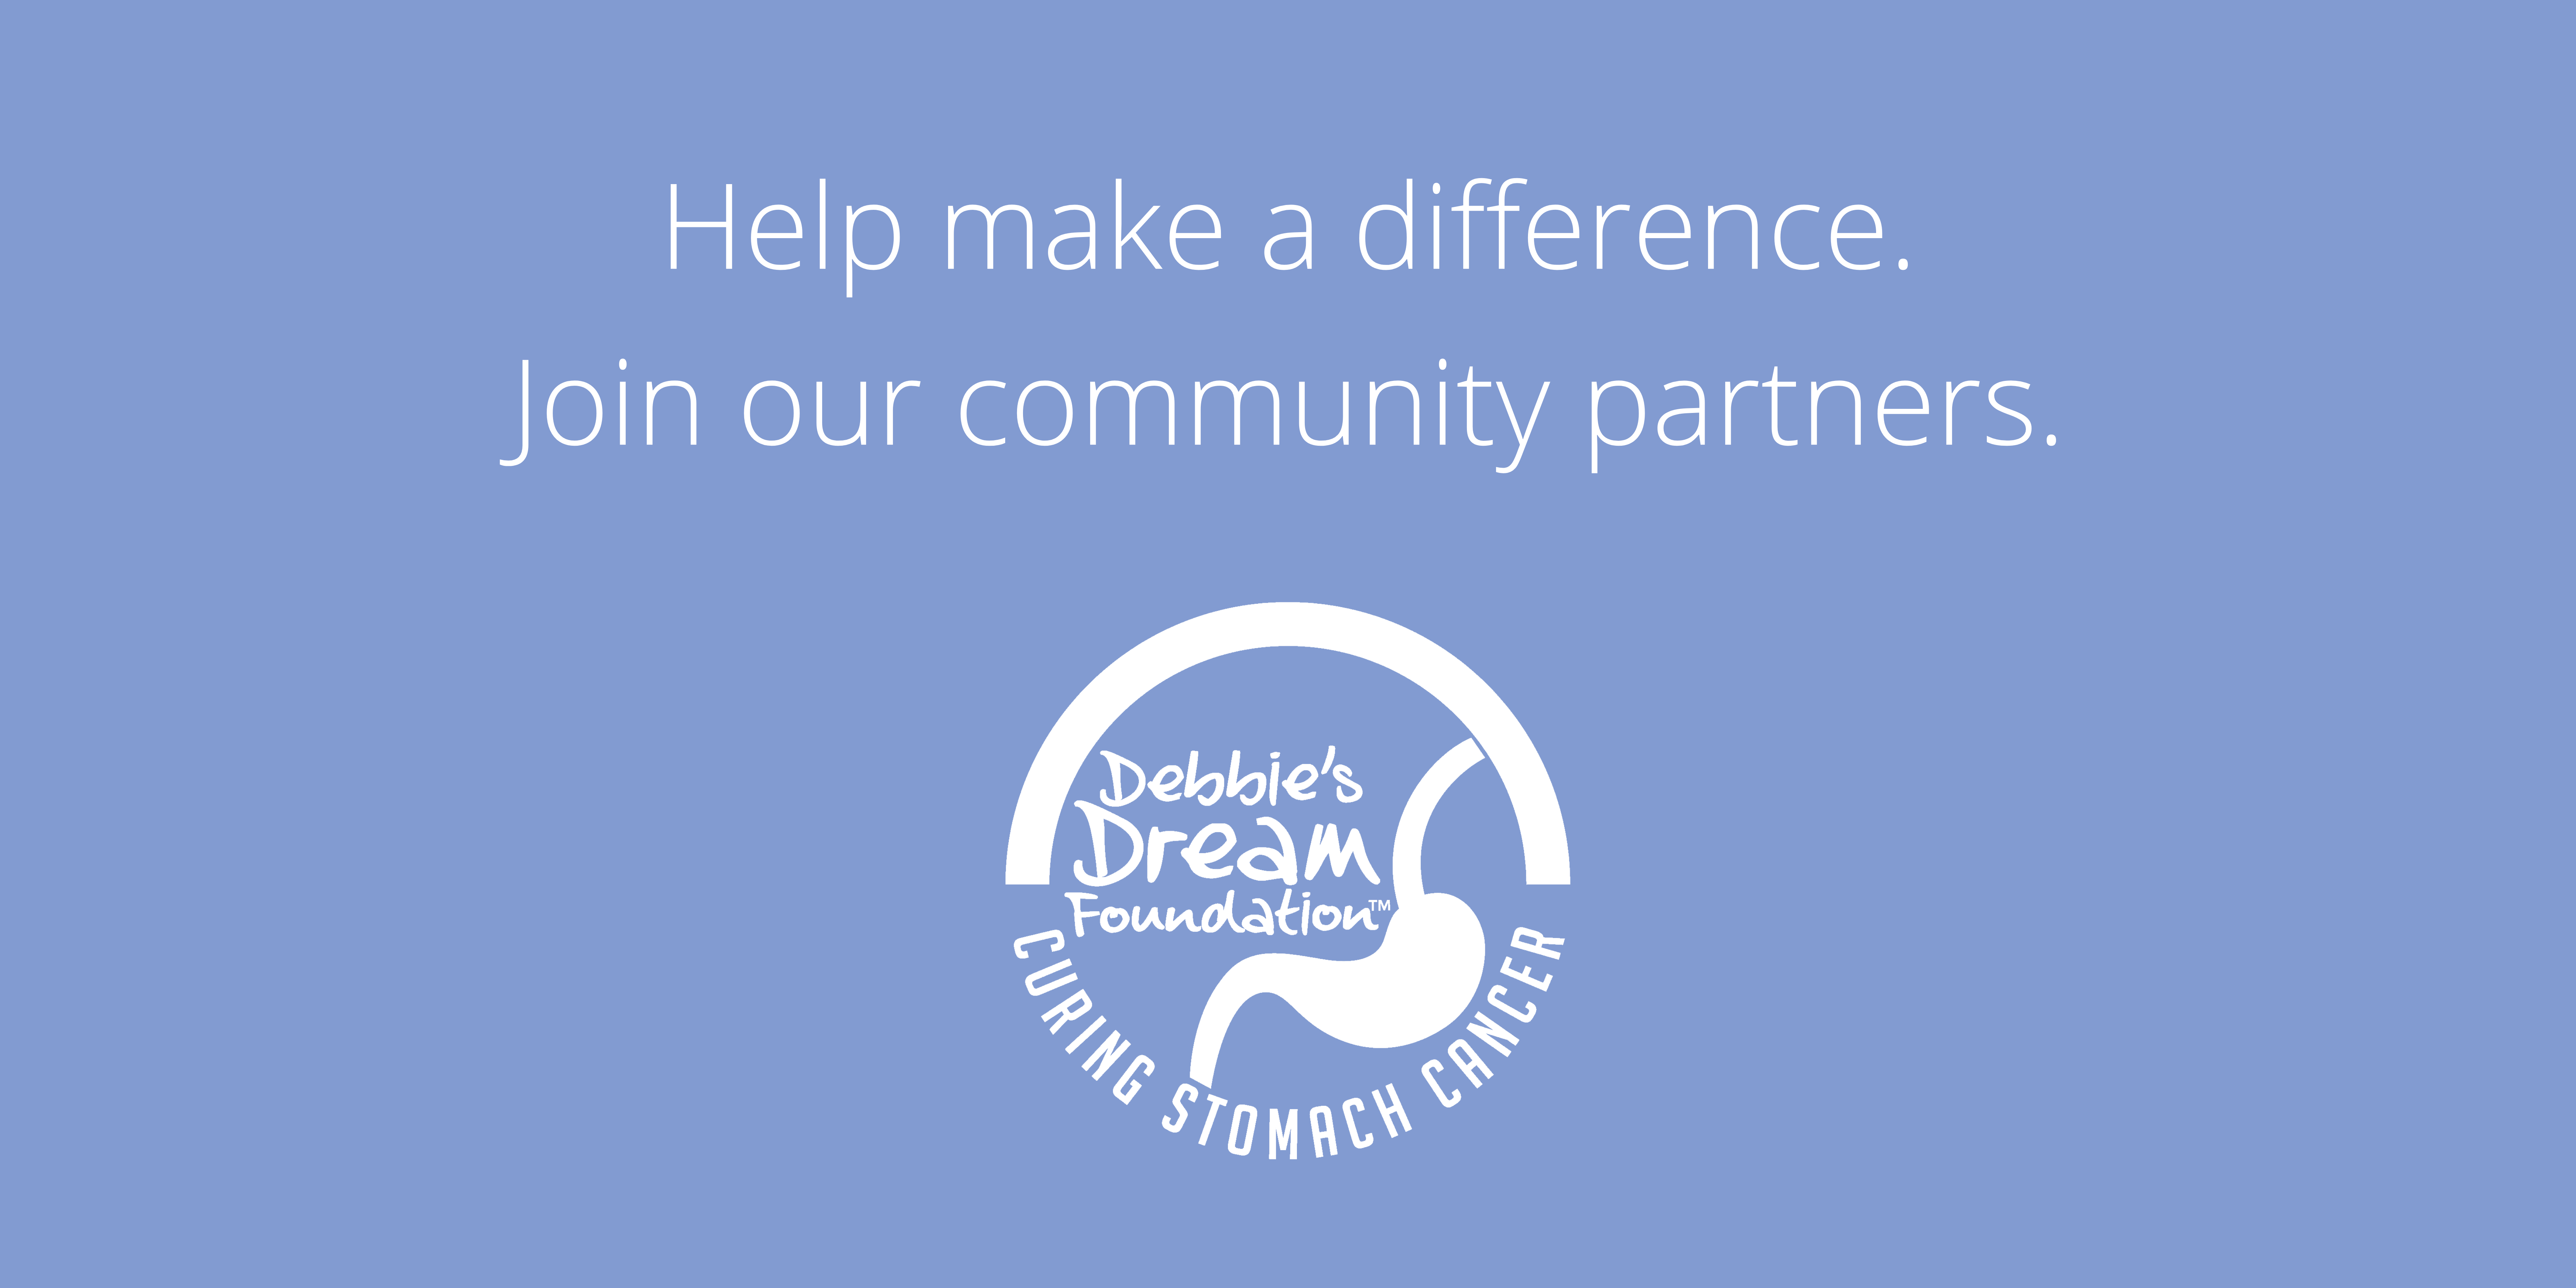 Join our community partners and help make a difference. (2)